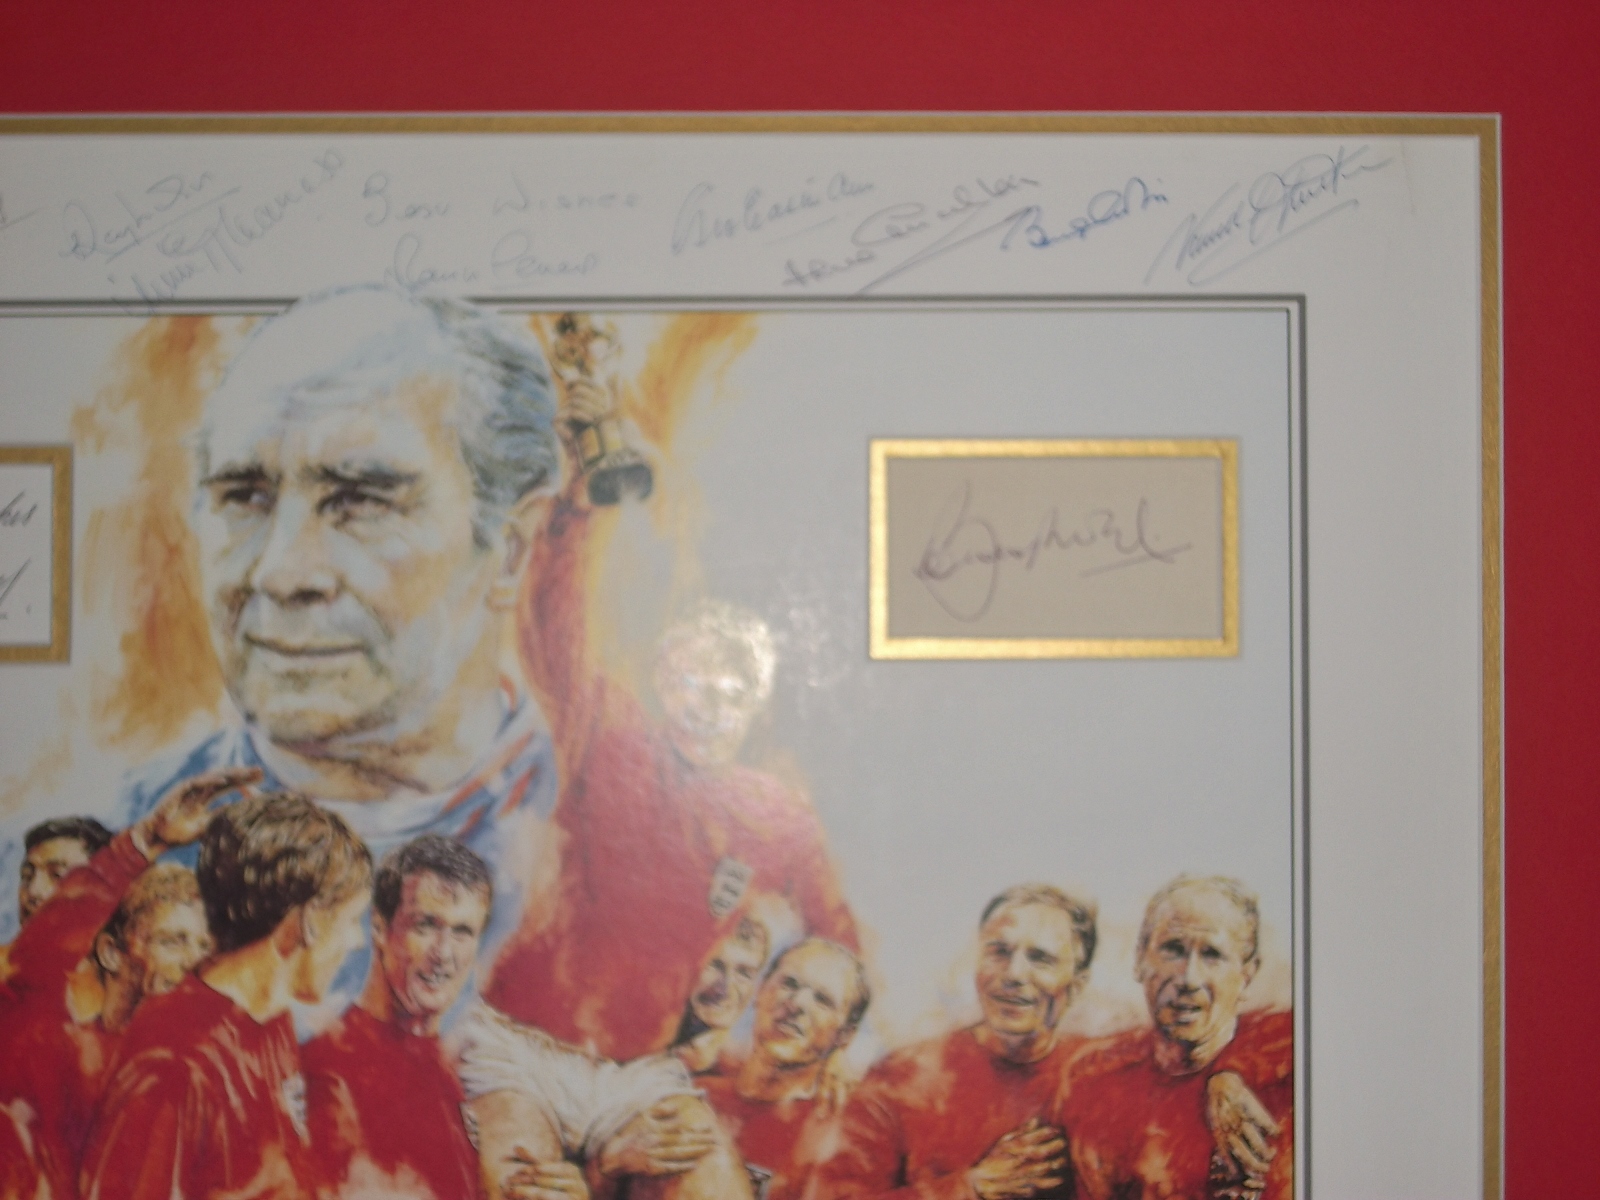 ENGLAND 1966 WORLD CUP WINNERS FULLY AUTOGRAPHED DISPLAY - Image 4 of 7